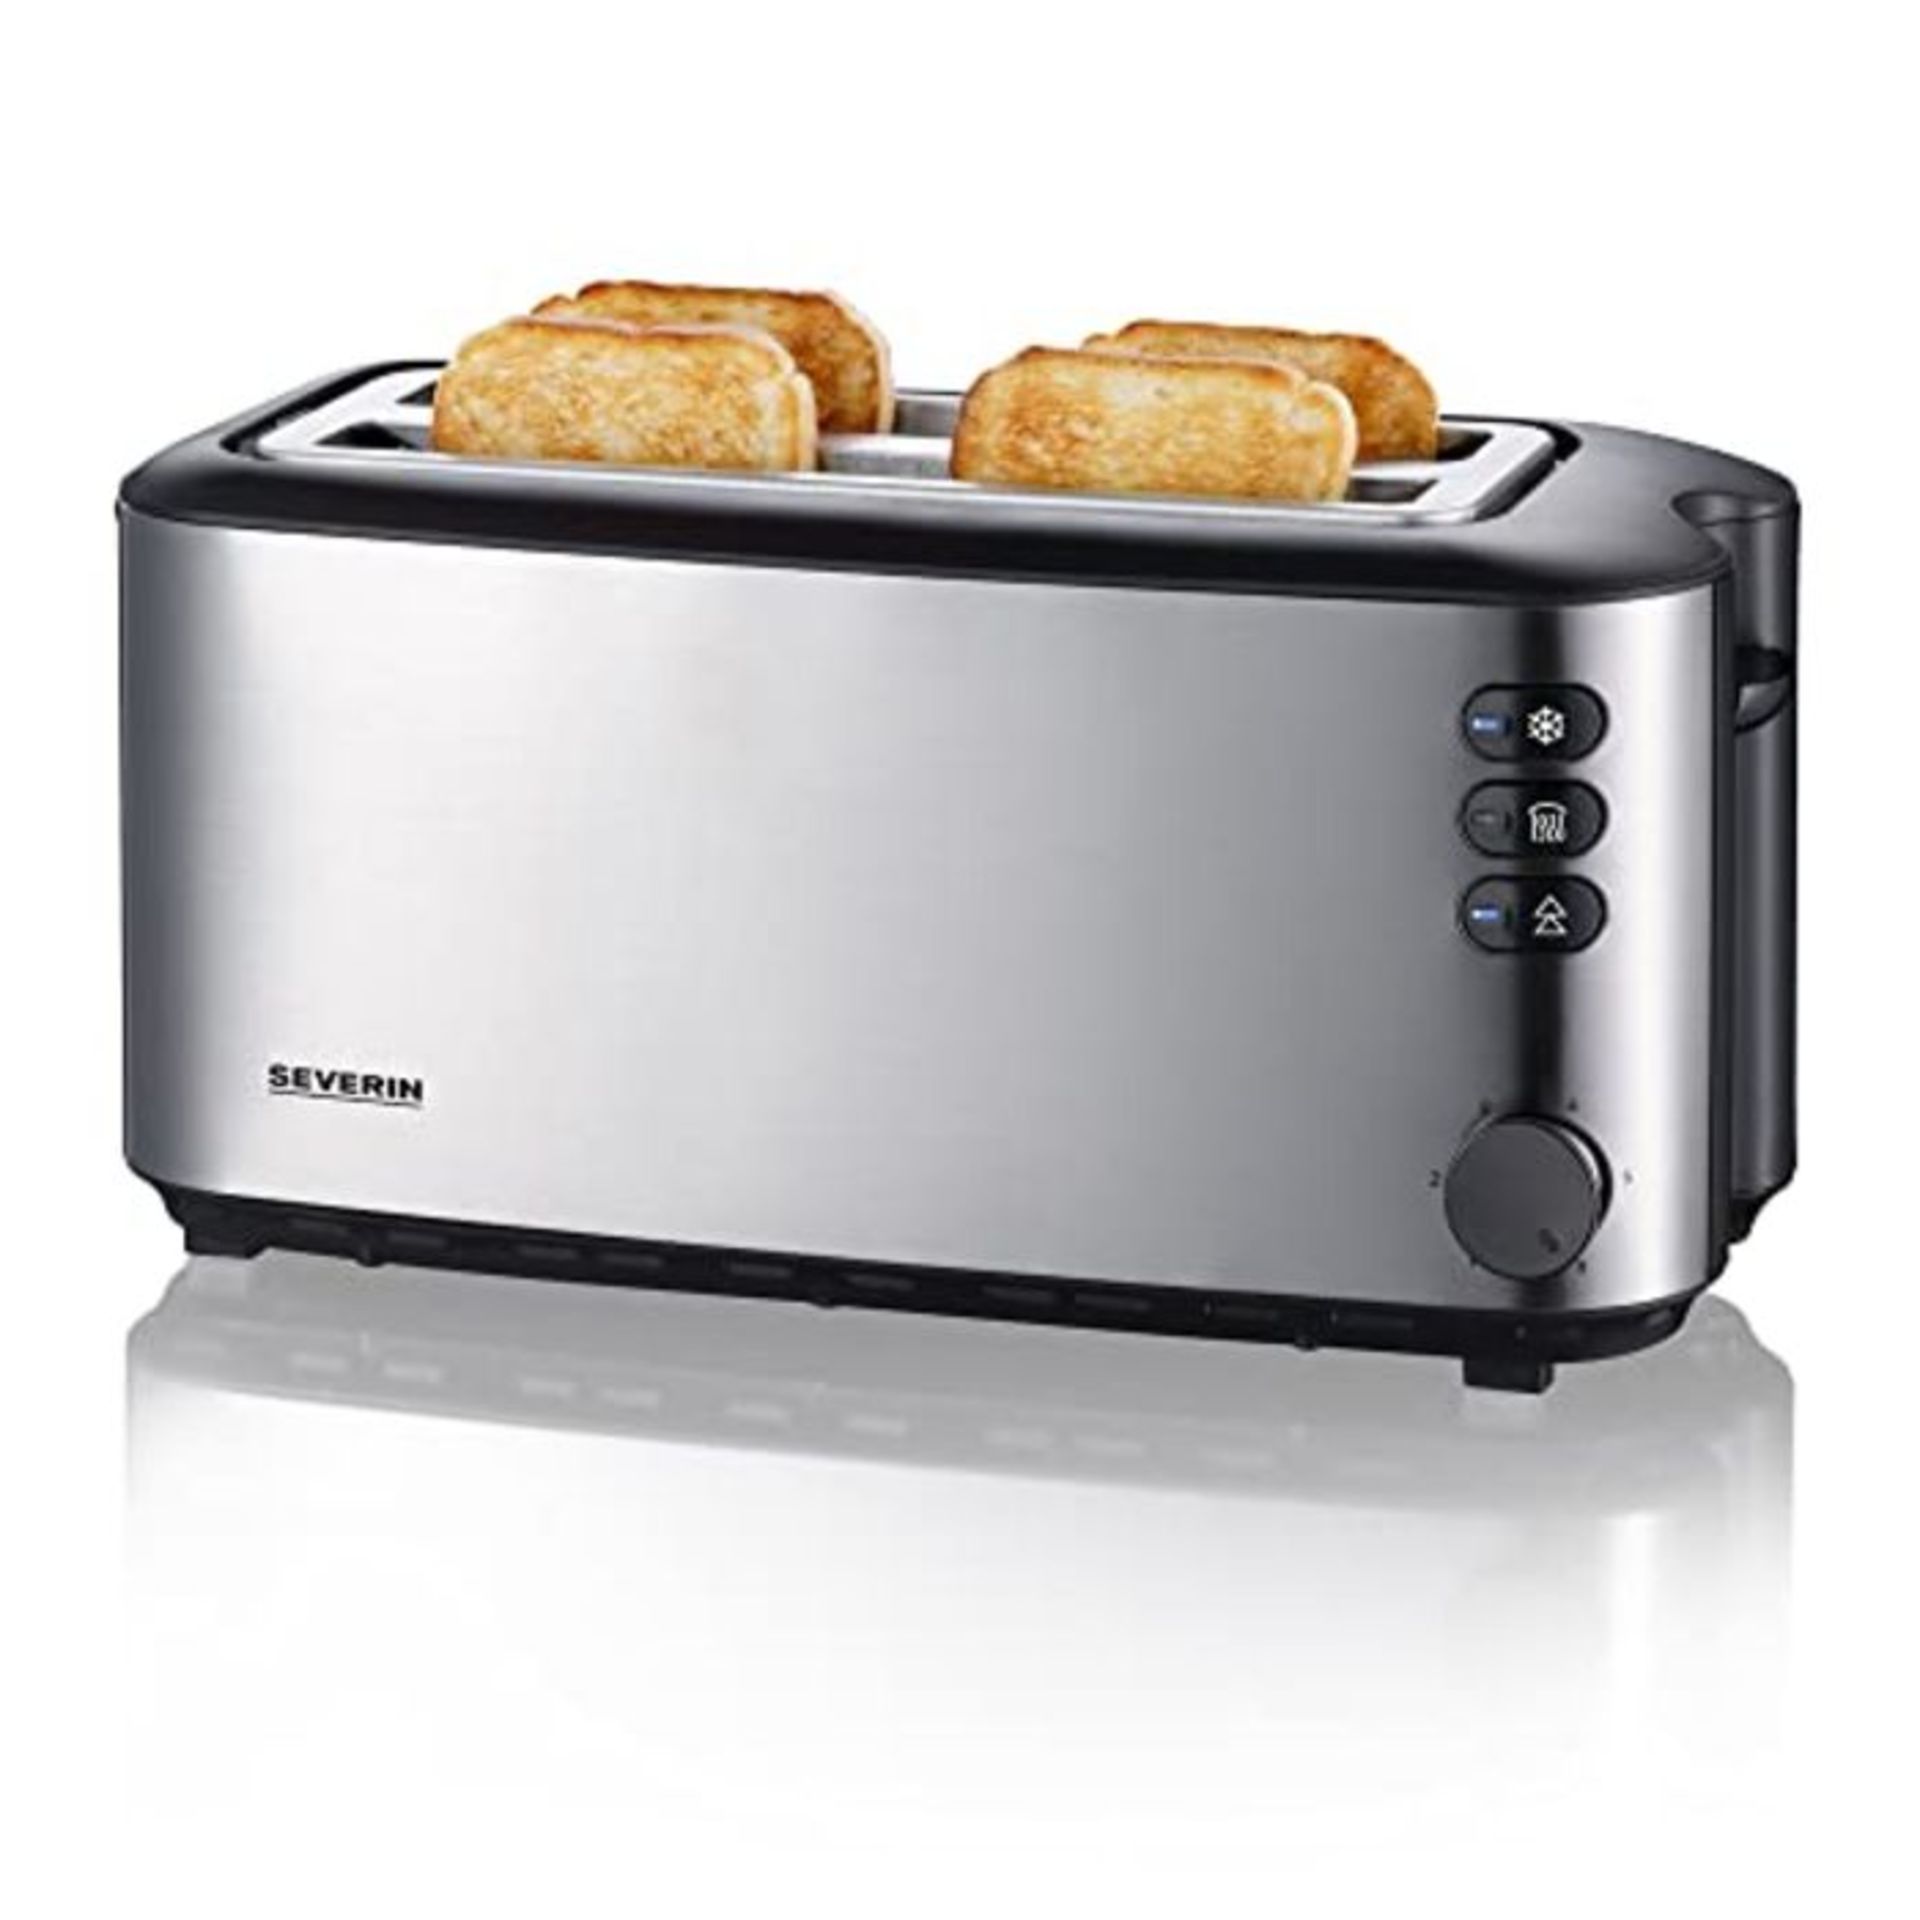 Severin 2509 Automatic 4-Slice Long Slot Toaster, 1400 W, Stainless Steel-Black Chambe